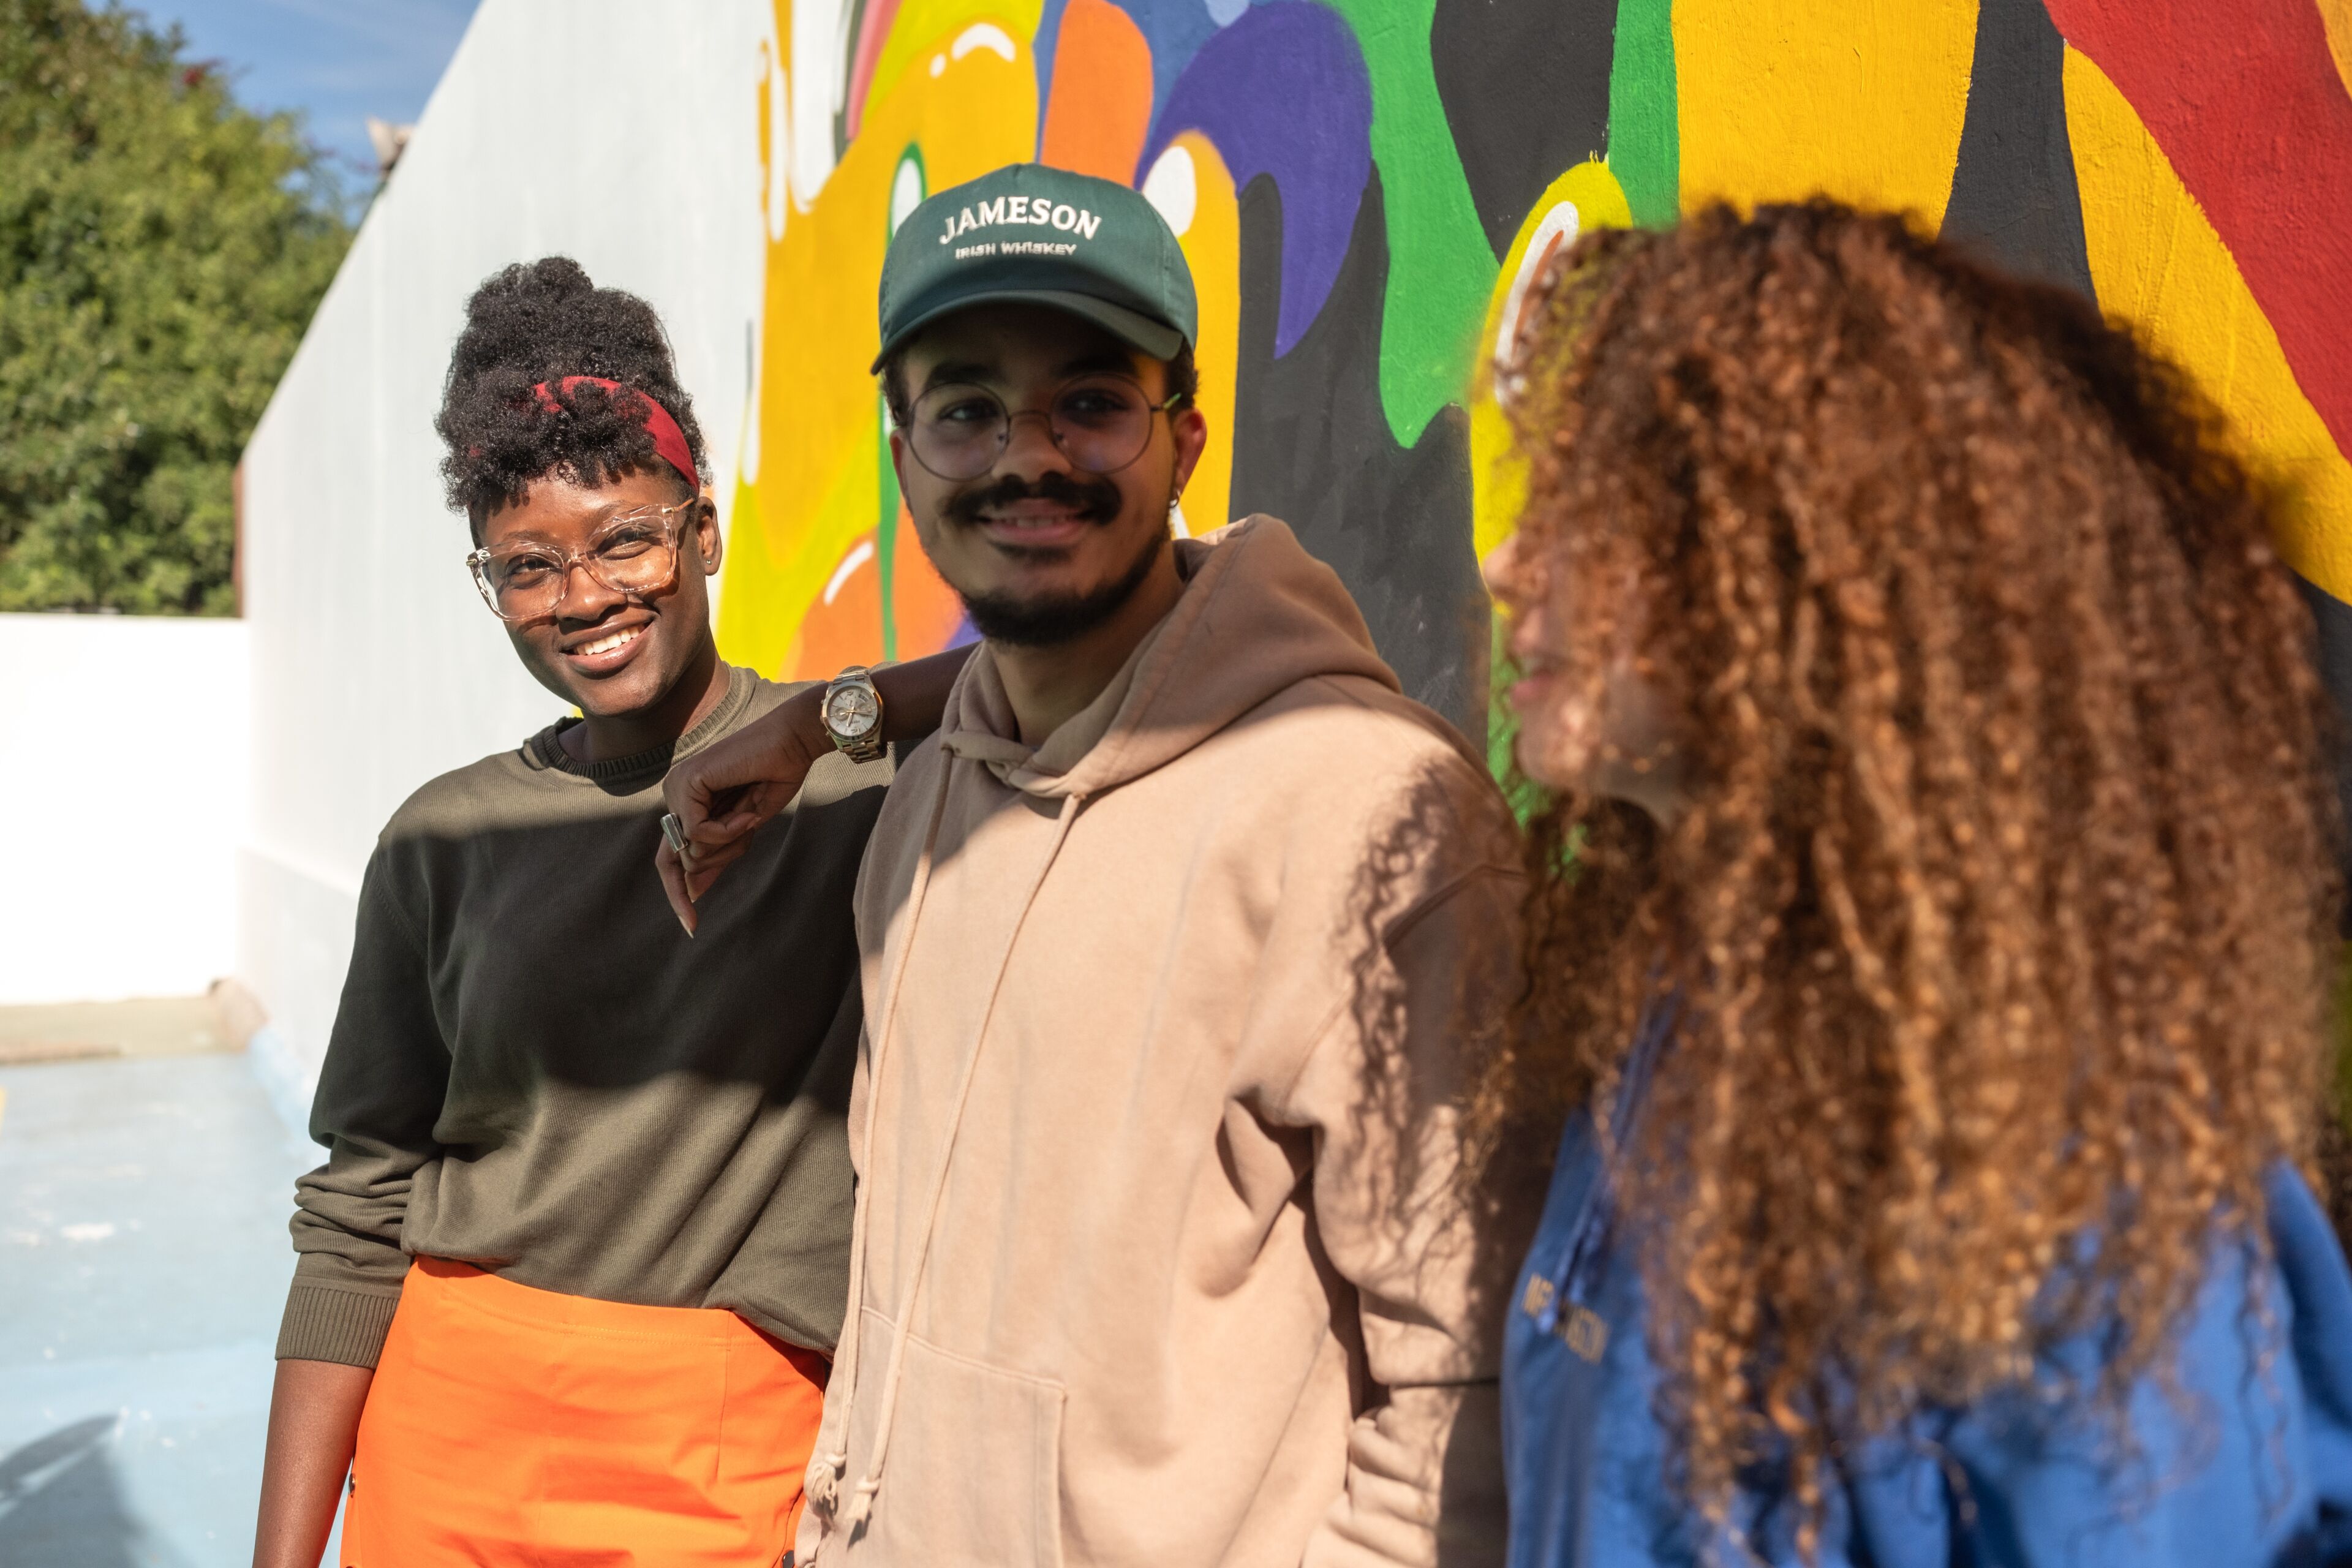 Three friends smile brightly in the sunshine against the backdrop of a colorful mural.